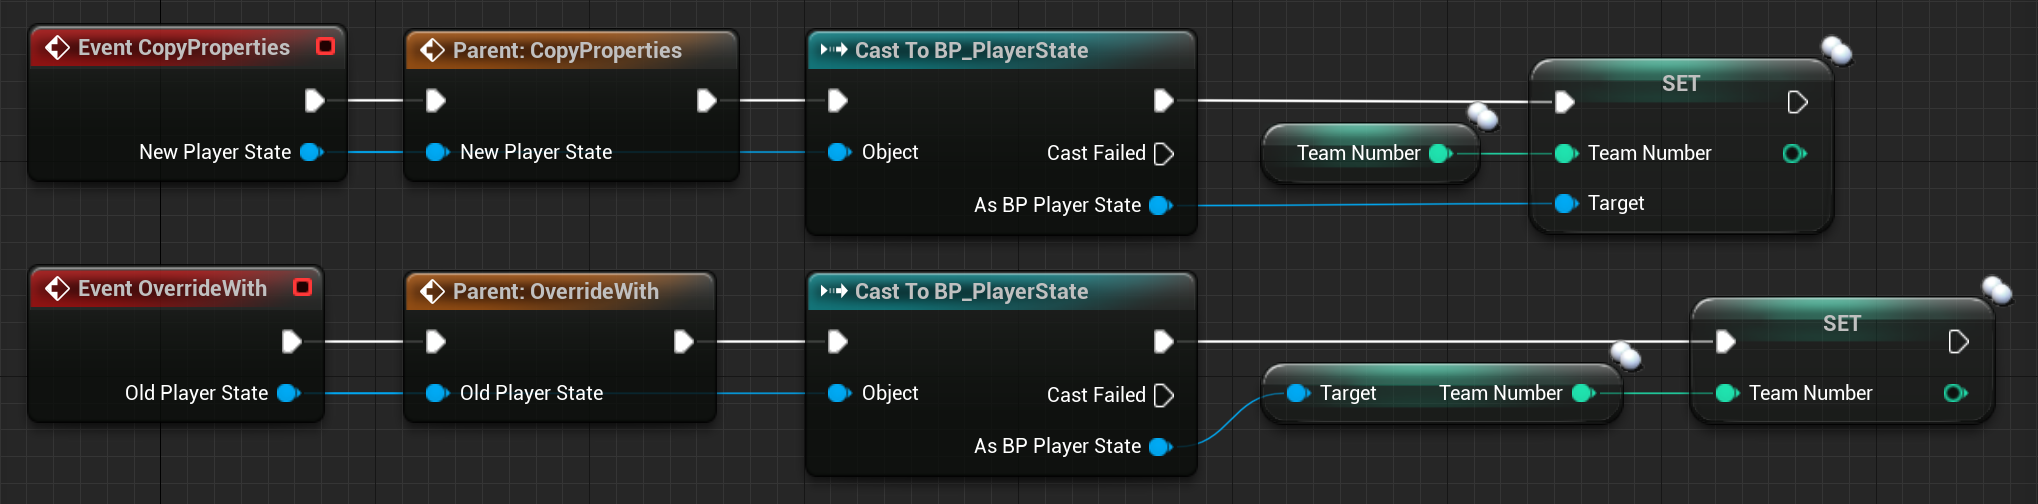 Example of copying properties from old to new Player State via Copy Properties and Override With events.